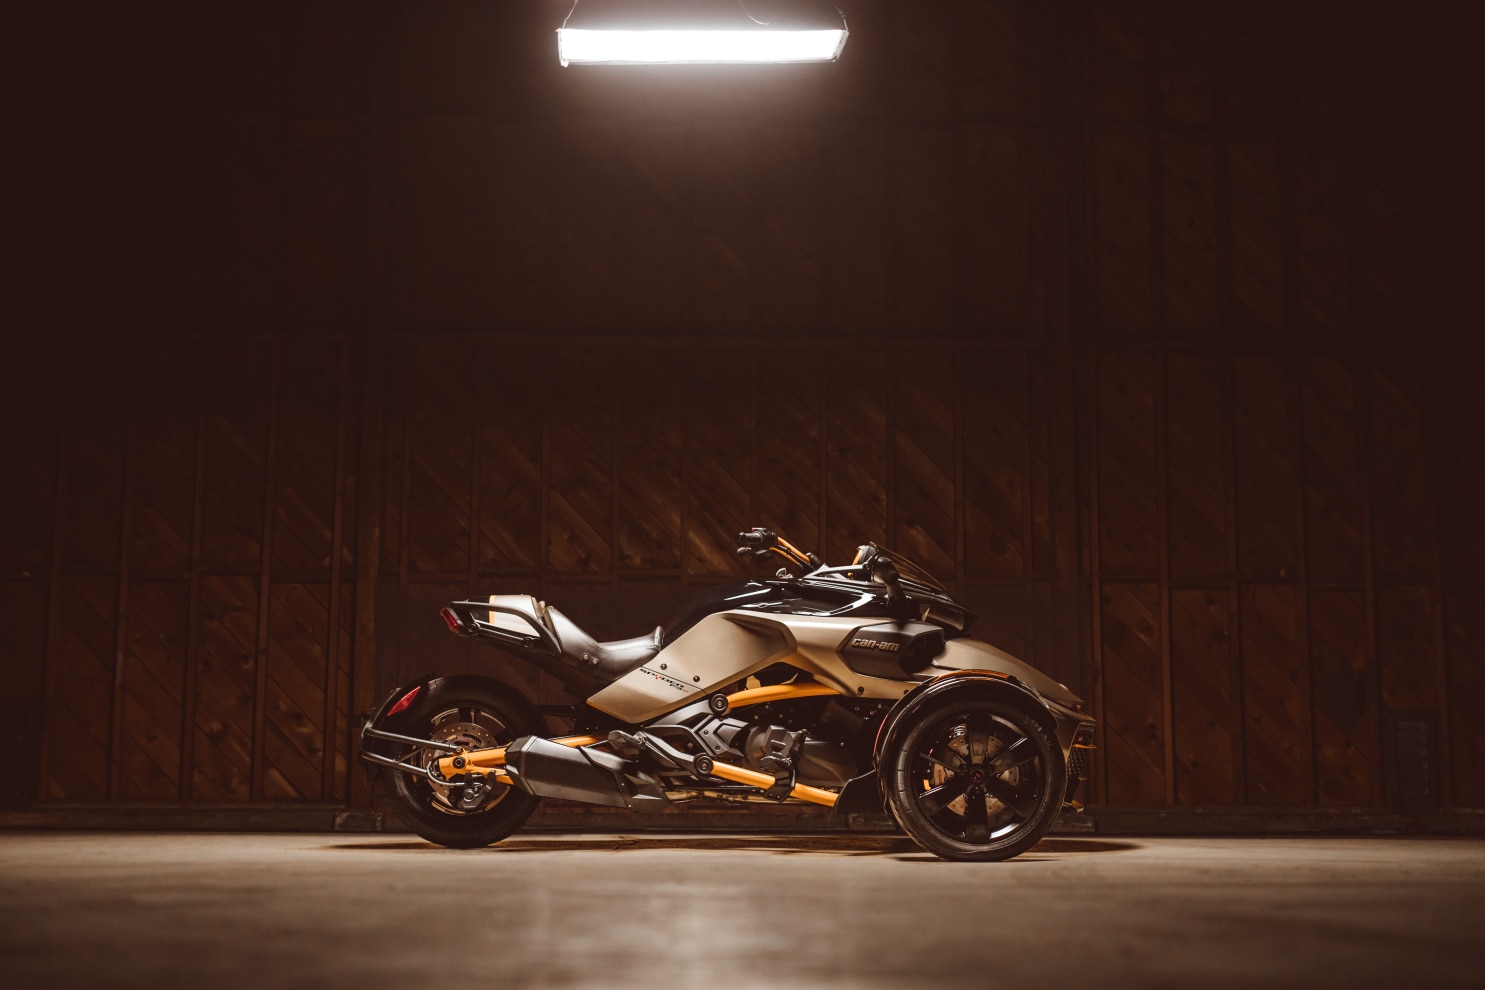 A Spyder F3 being showcased in a wooden warehouse